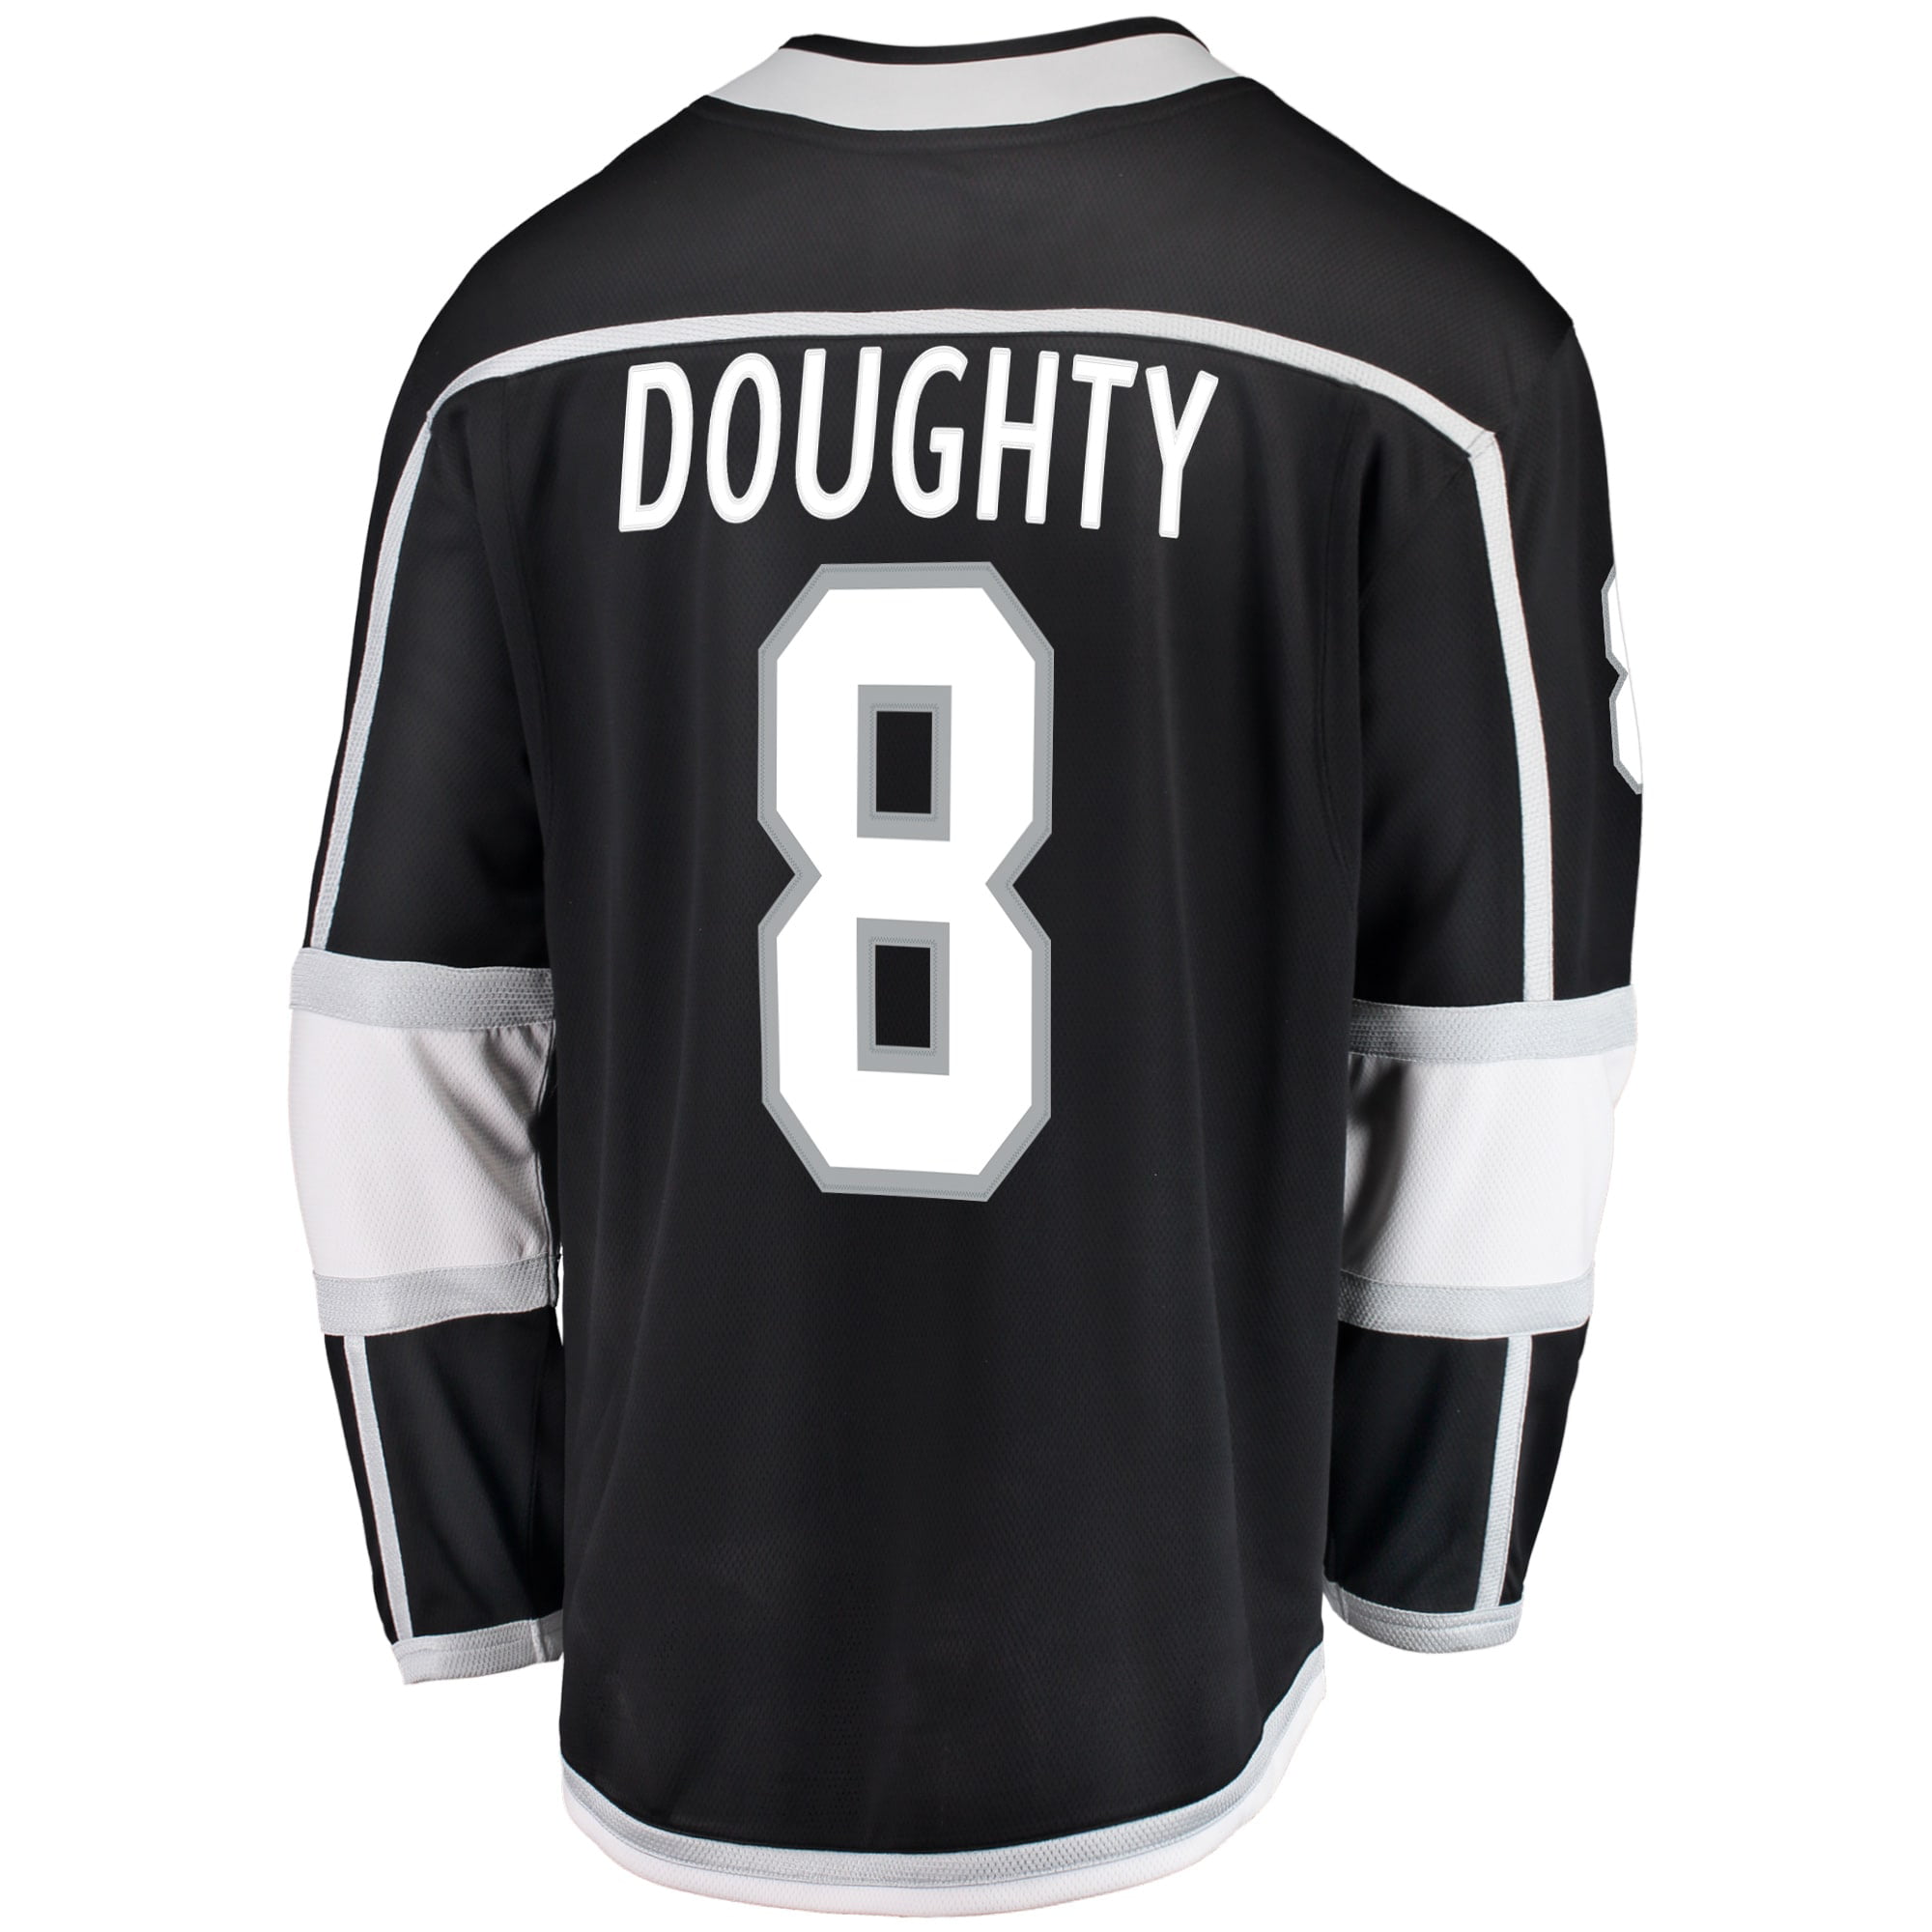 drew doughty youth jersey